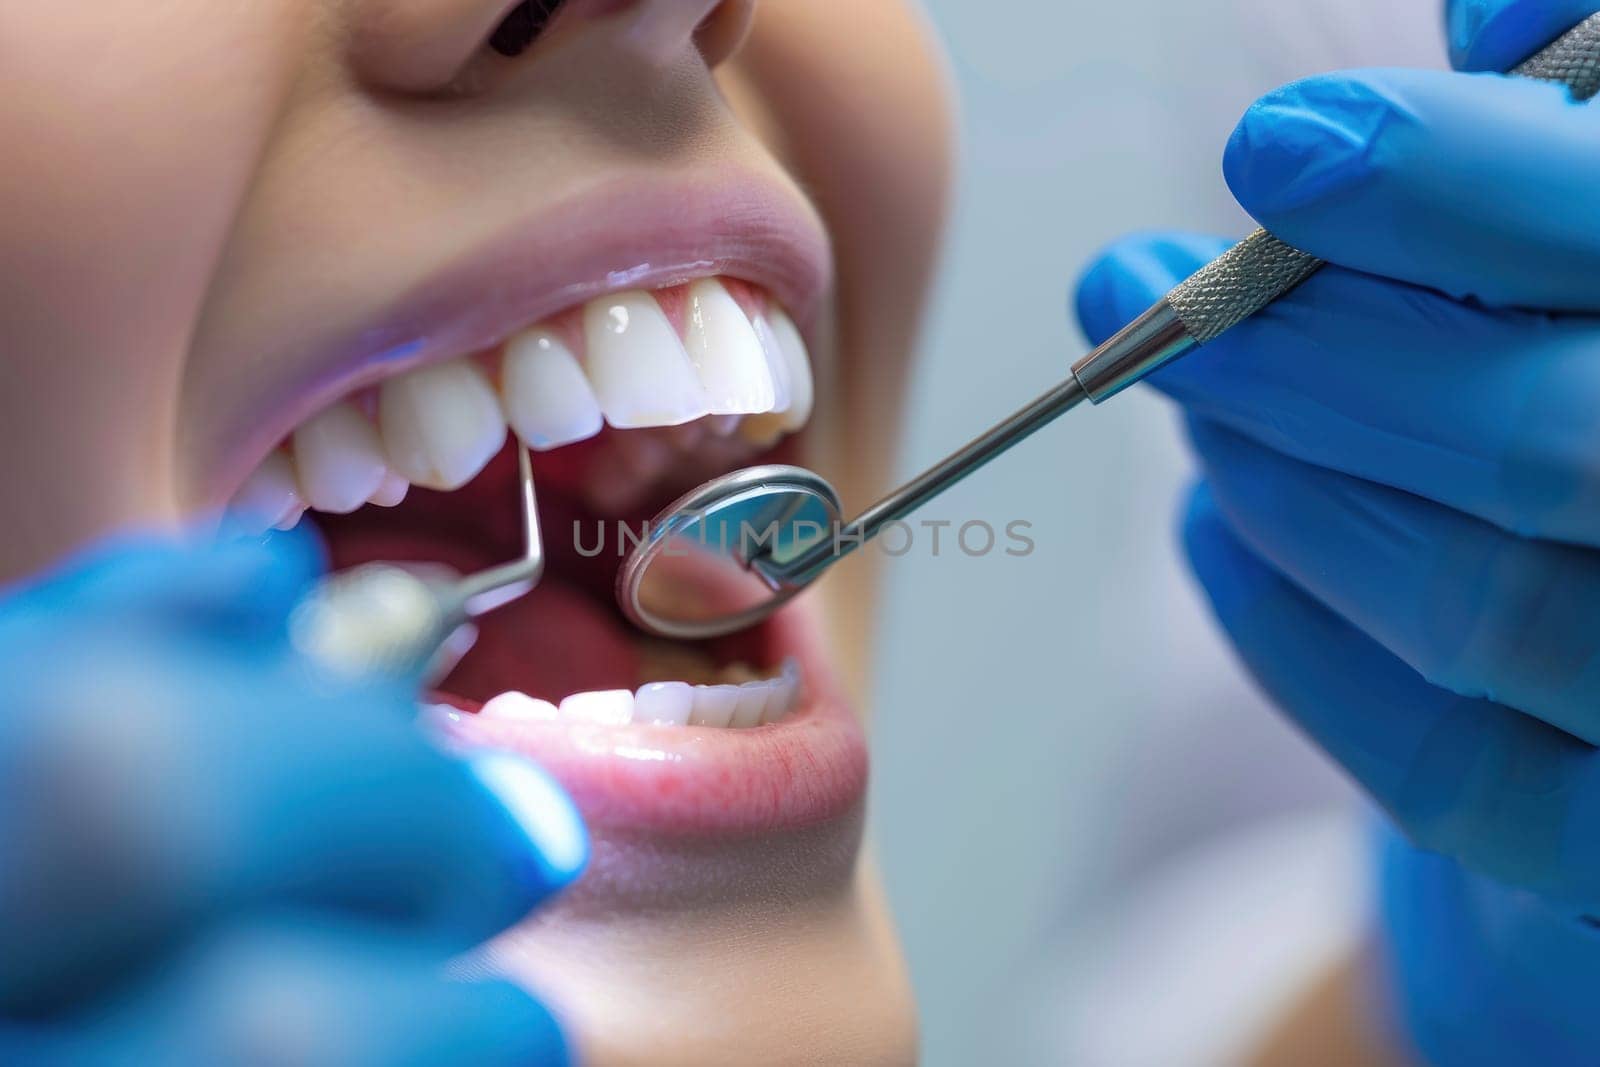 A dentist is cleaning a patient's teeth with a mirror and a dental tool. The patient has a bright smile, indicating that they are in good dental health. The dentist is wearing blue gloves